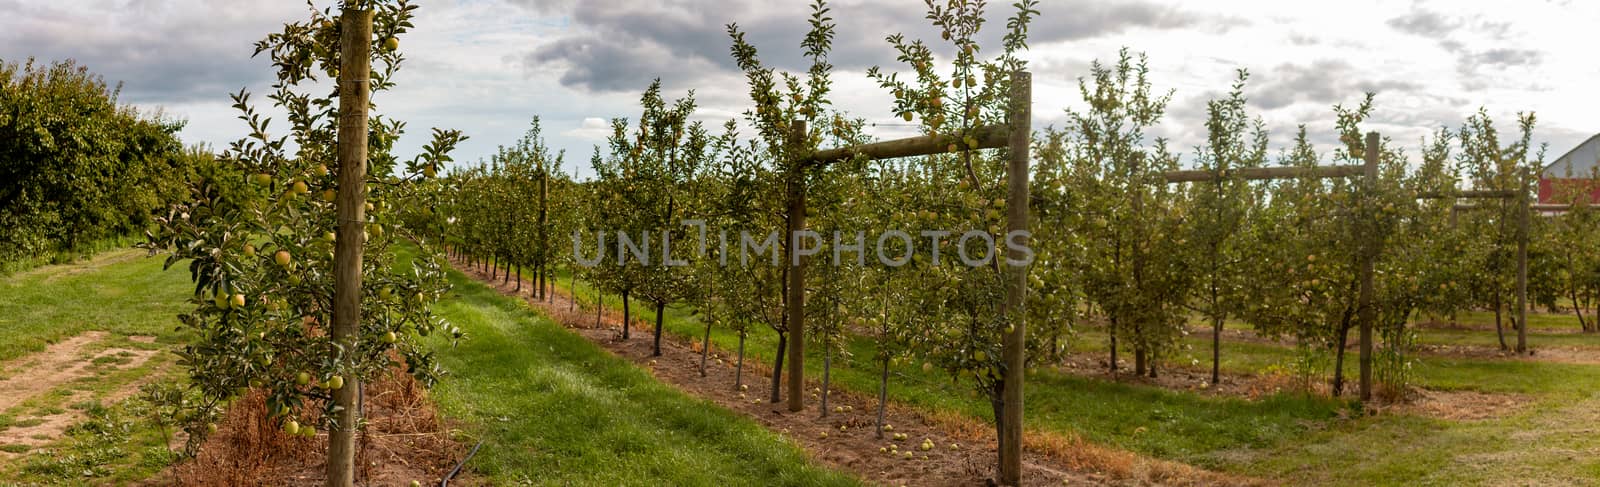 Apple orchard panoramic photograph in Ontario Canada, Apples are a large Canadian agriculture product by mynewturtle1